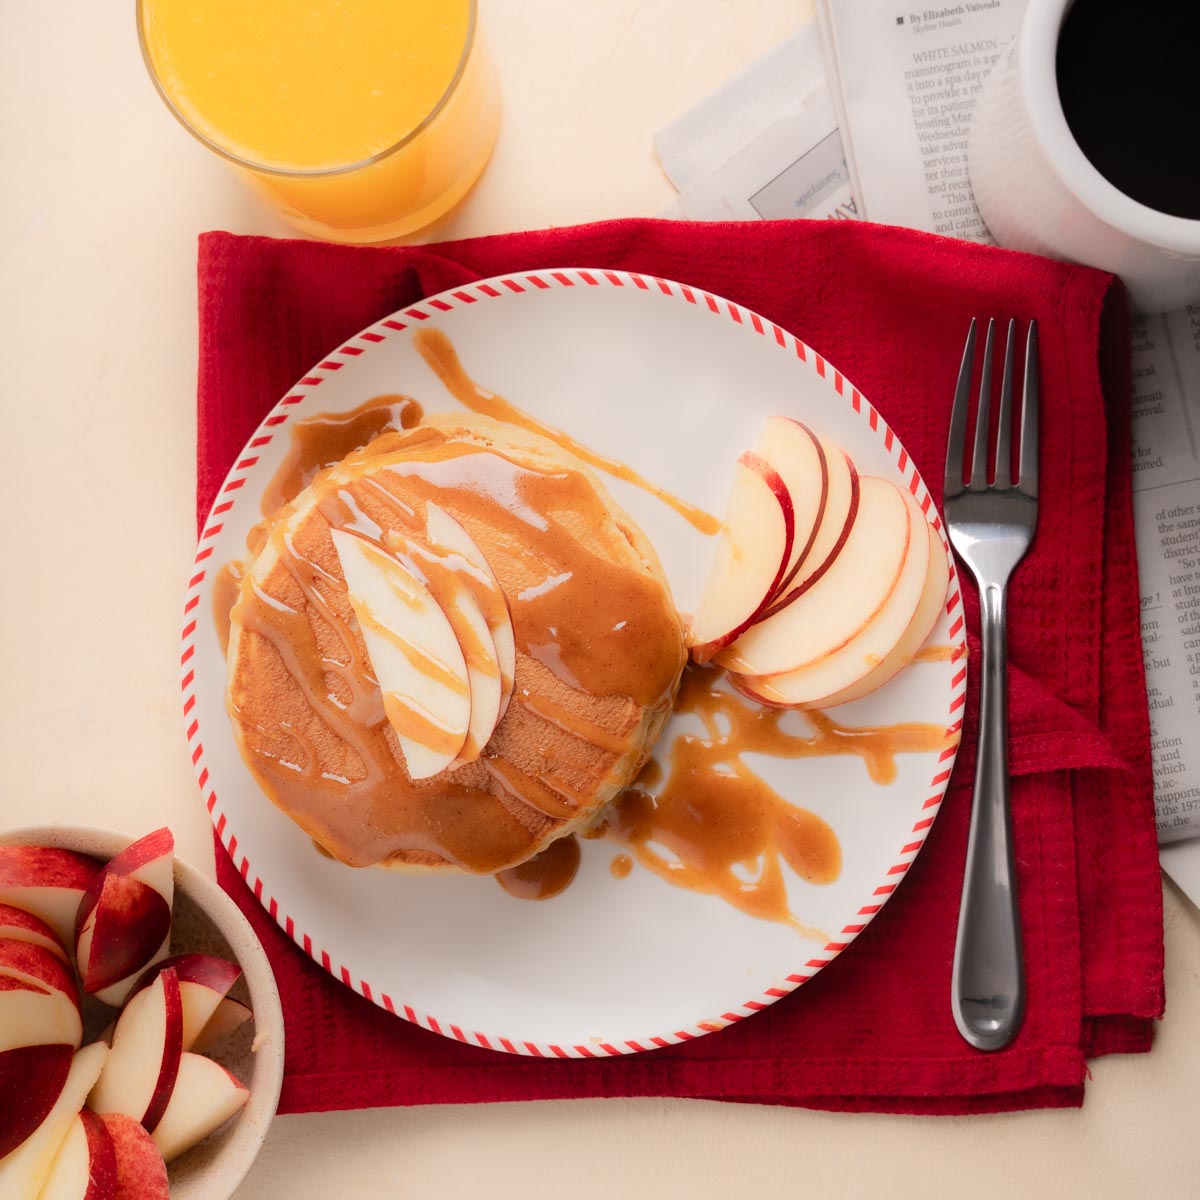 Full sized sweet cream pancakes drizzled with maple peanut butter syrup with sliced apples, orange juice, and coffee.